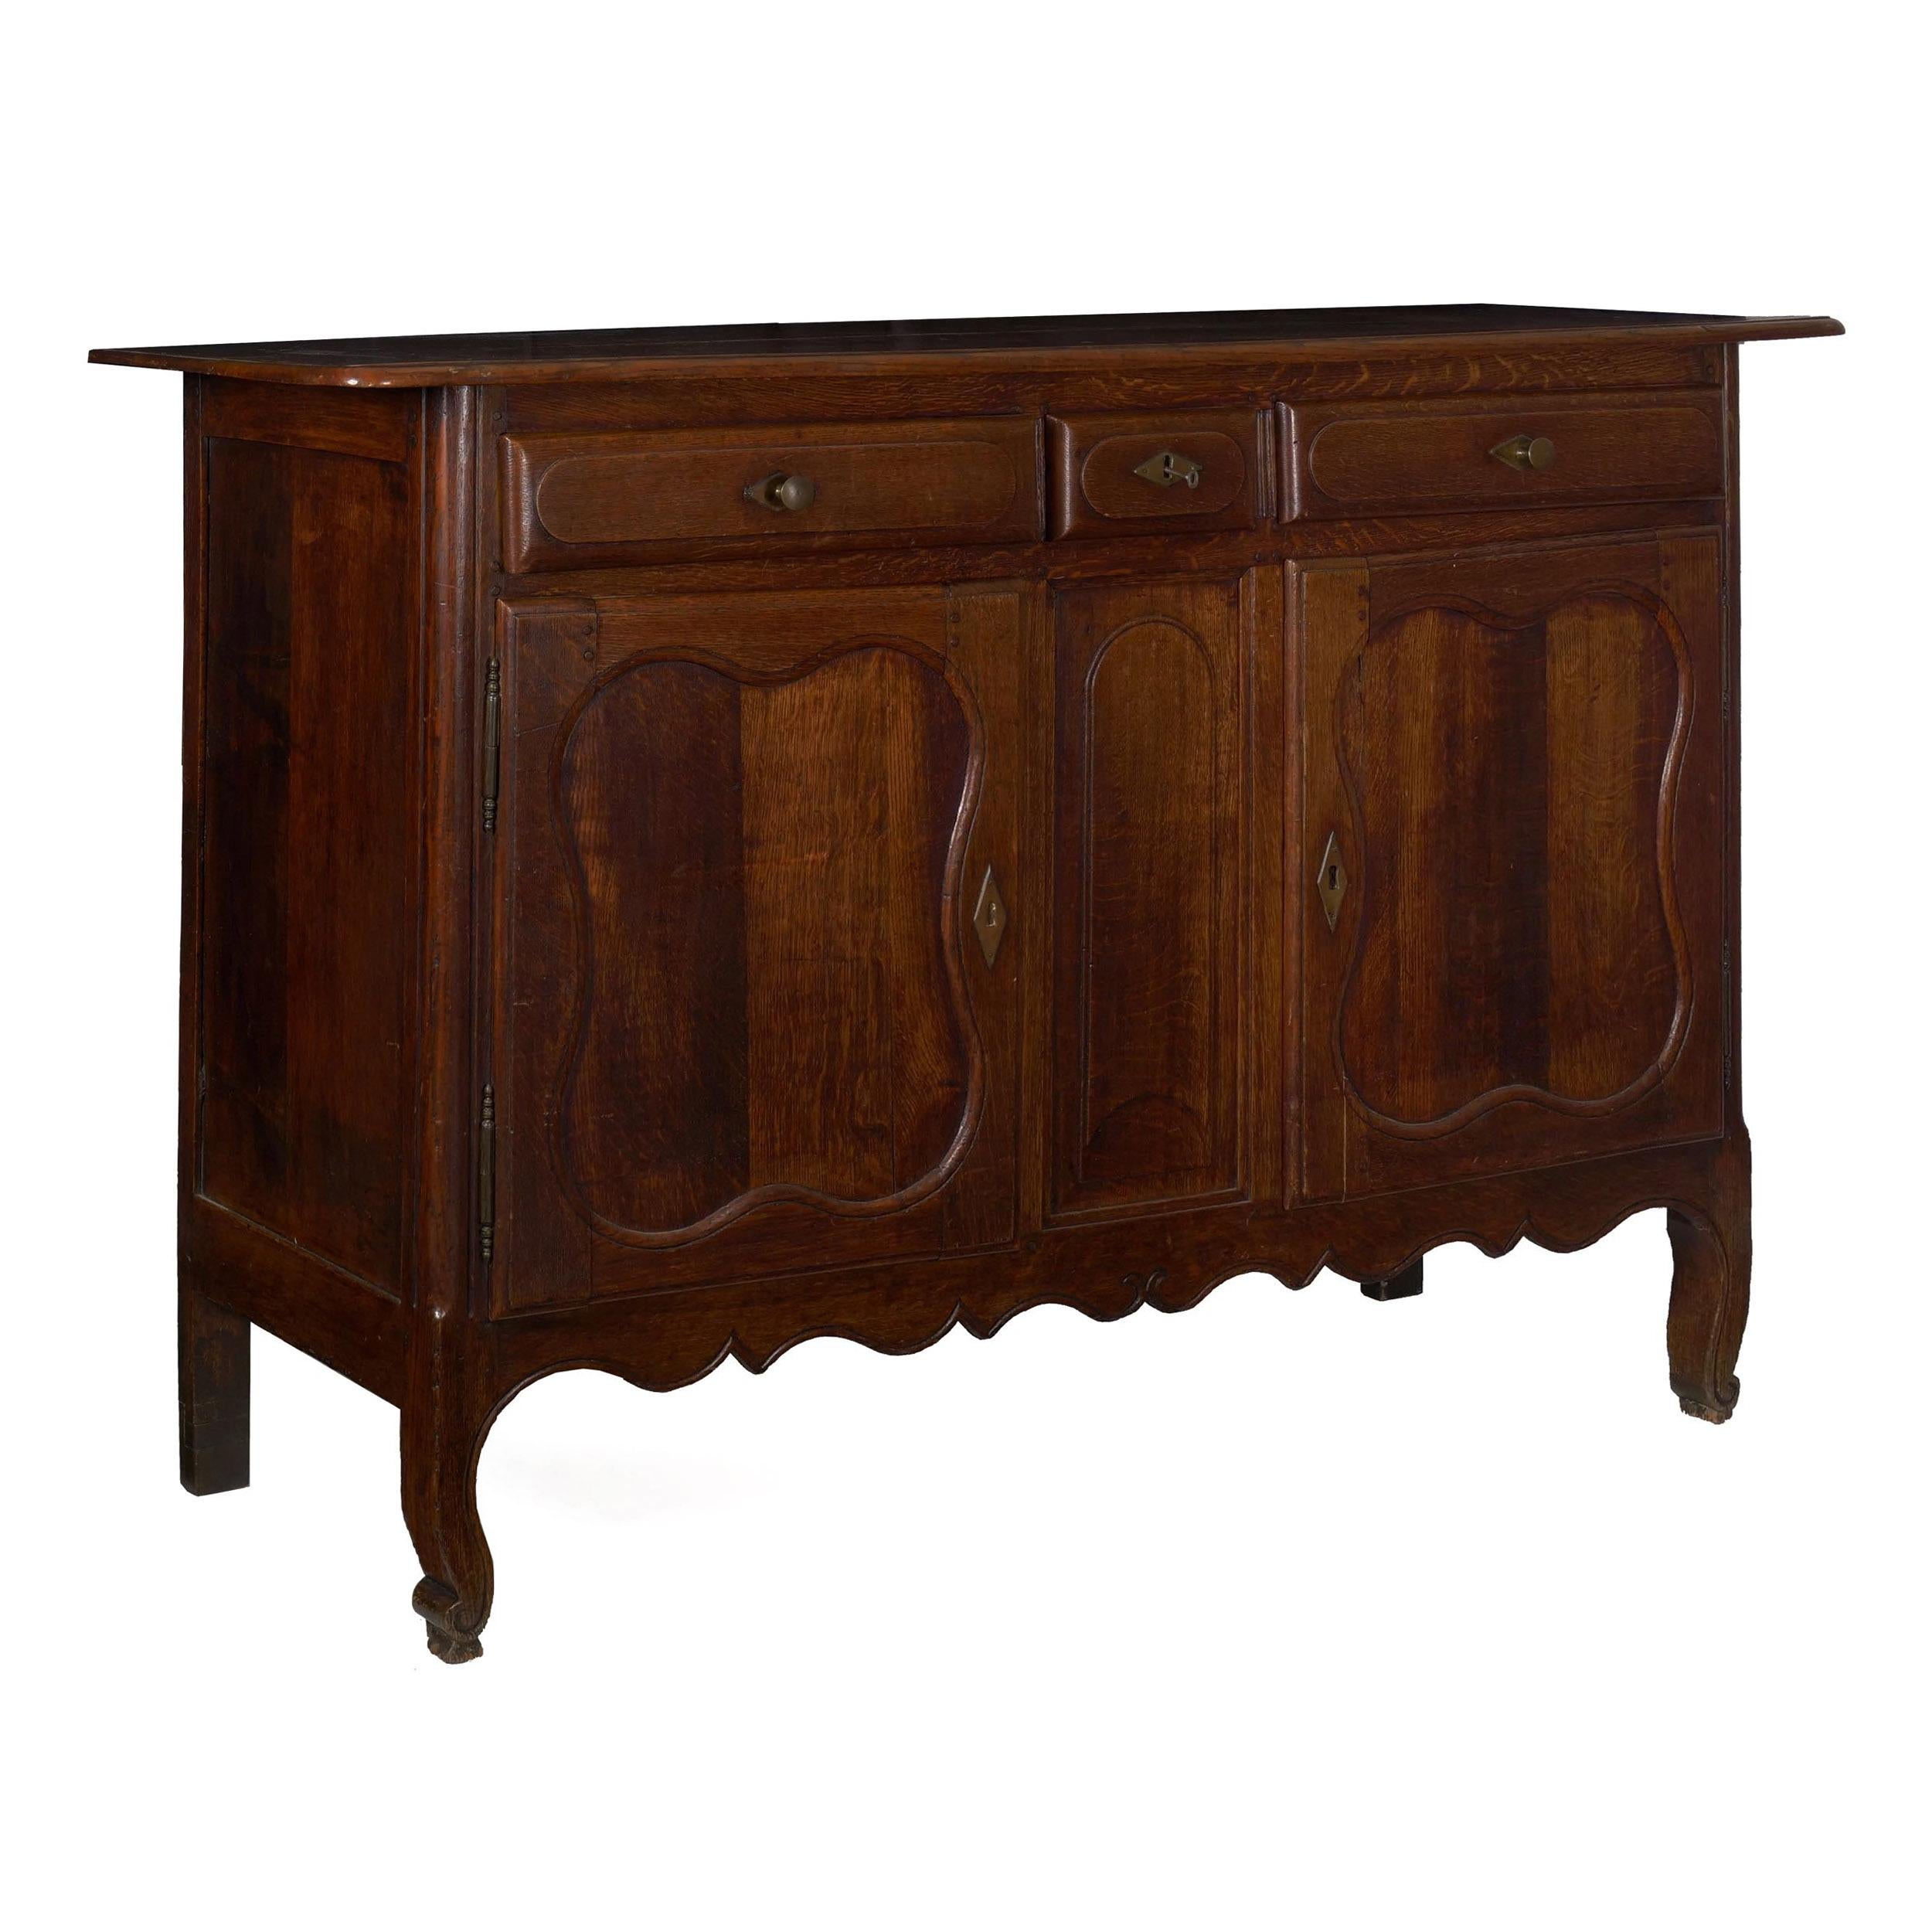 French Provincial patinated oak server cabinet,
circa 19th century with 18th century components
Item # 007DLG08P 

A large and striking serving cabinet, this attractive piece brings a much needed sense of surface history to the interior. With a